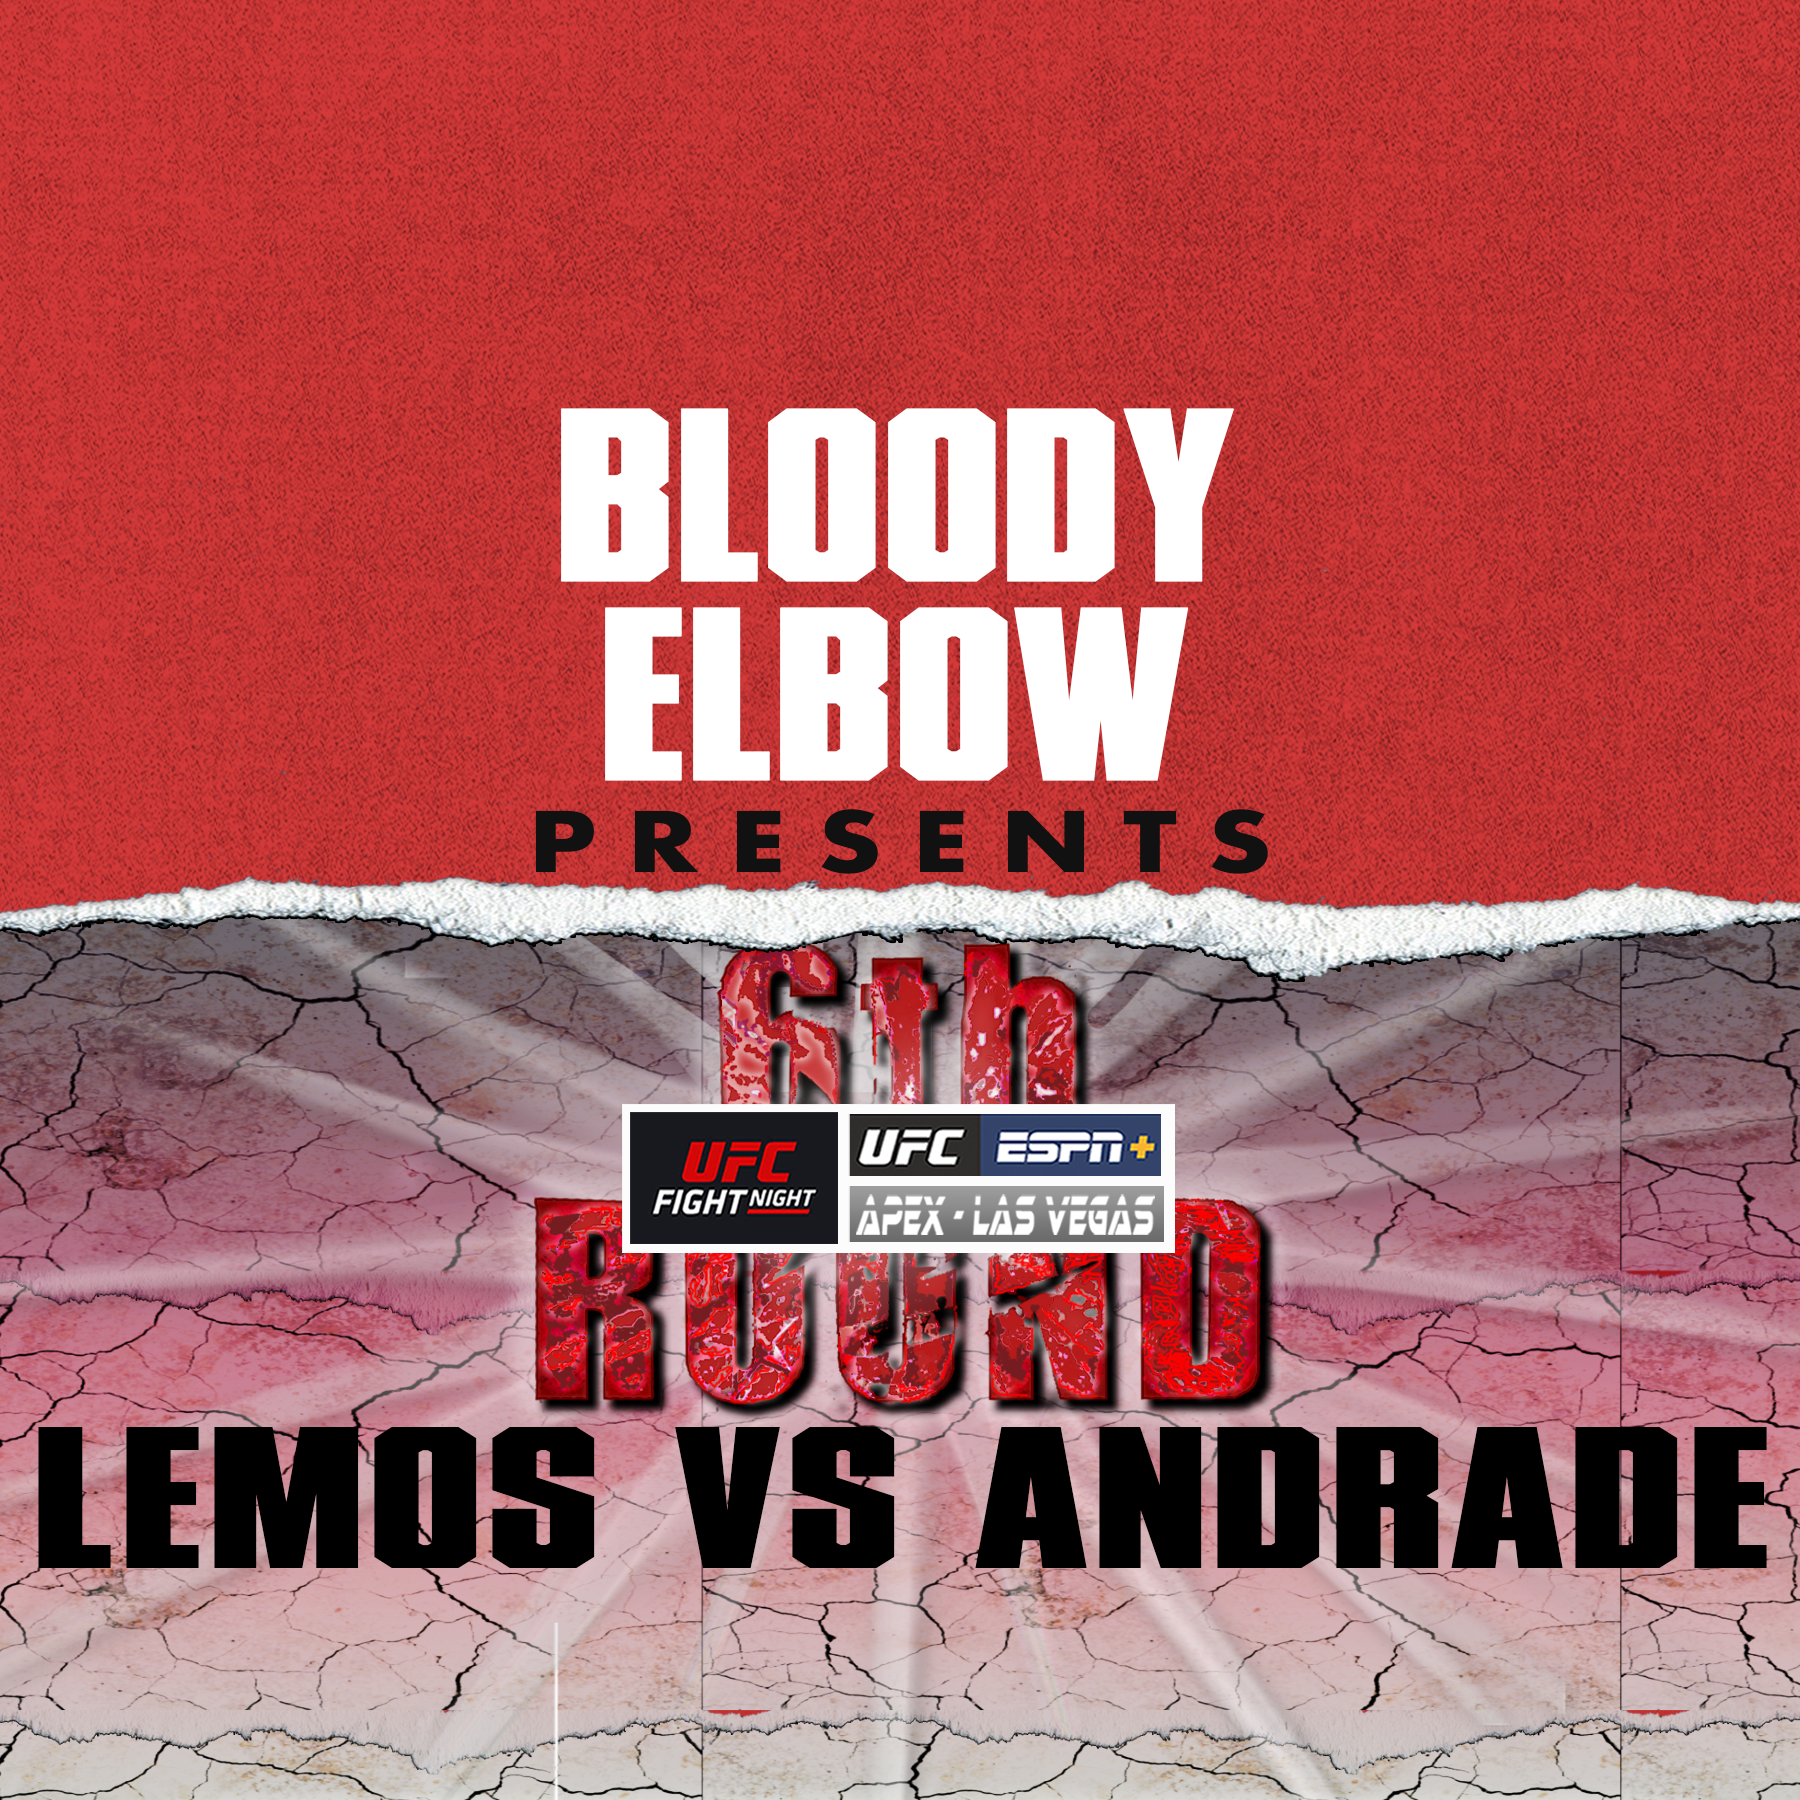 Post-Fight Show, UFC Post-Fight Show, 6th Rd, 6th Round Post-Fight Show, Zane Simon, Eddie Mercado, UFC Results, UFC Reactions, UFC Hot Takes, UFC Possible Next Fights, UFC Vegas 52, UFC Fight Night, Amanda Lemos vs Jessica Andrade,